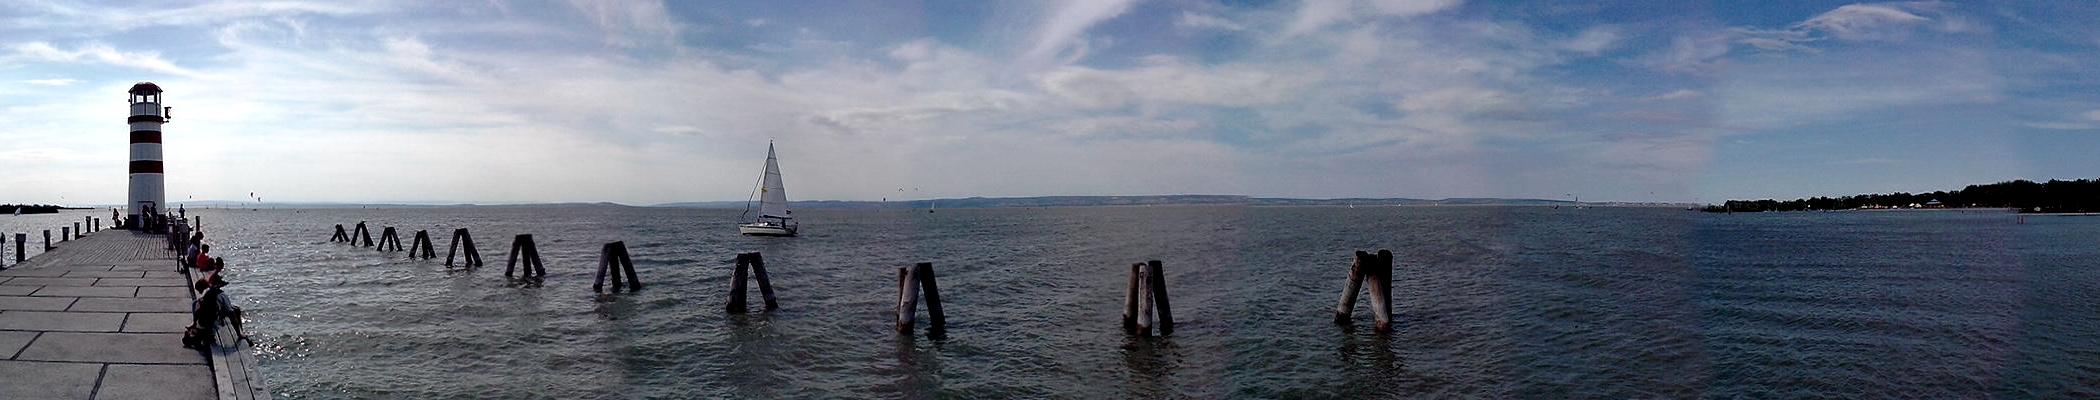 Panorama vom See in Podersdorf (Ostufer).